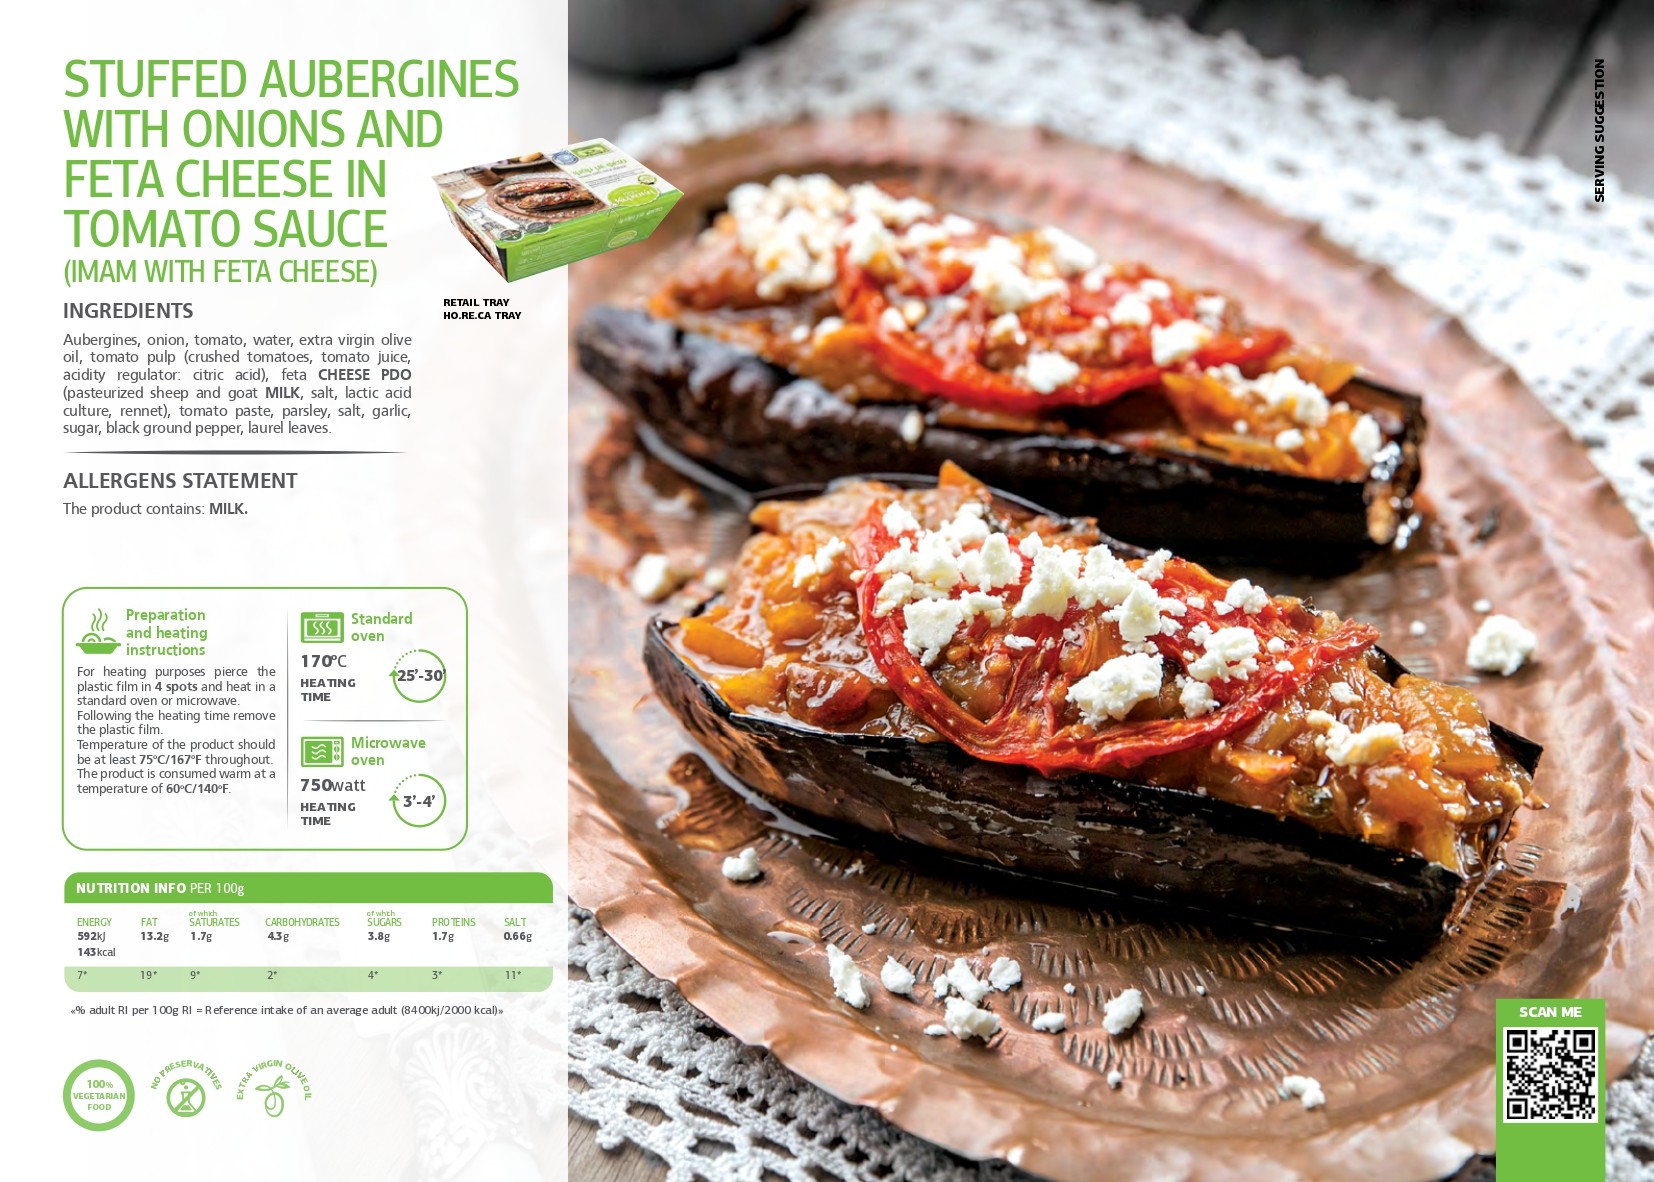 SK - Stuffed aubergines with onions and feta cheese in tomato sauce (Imam with feta cheese) pdf image